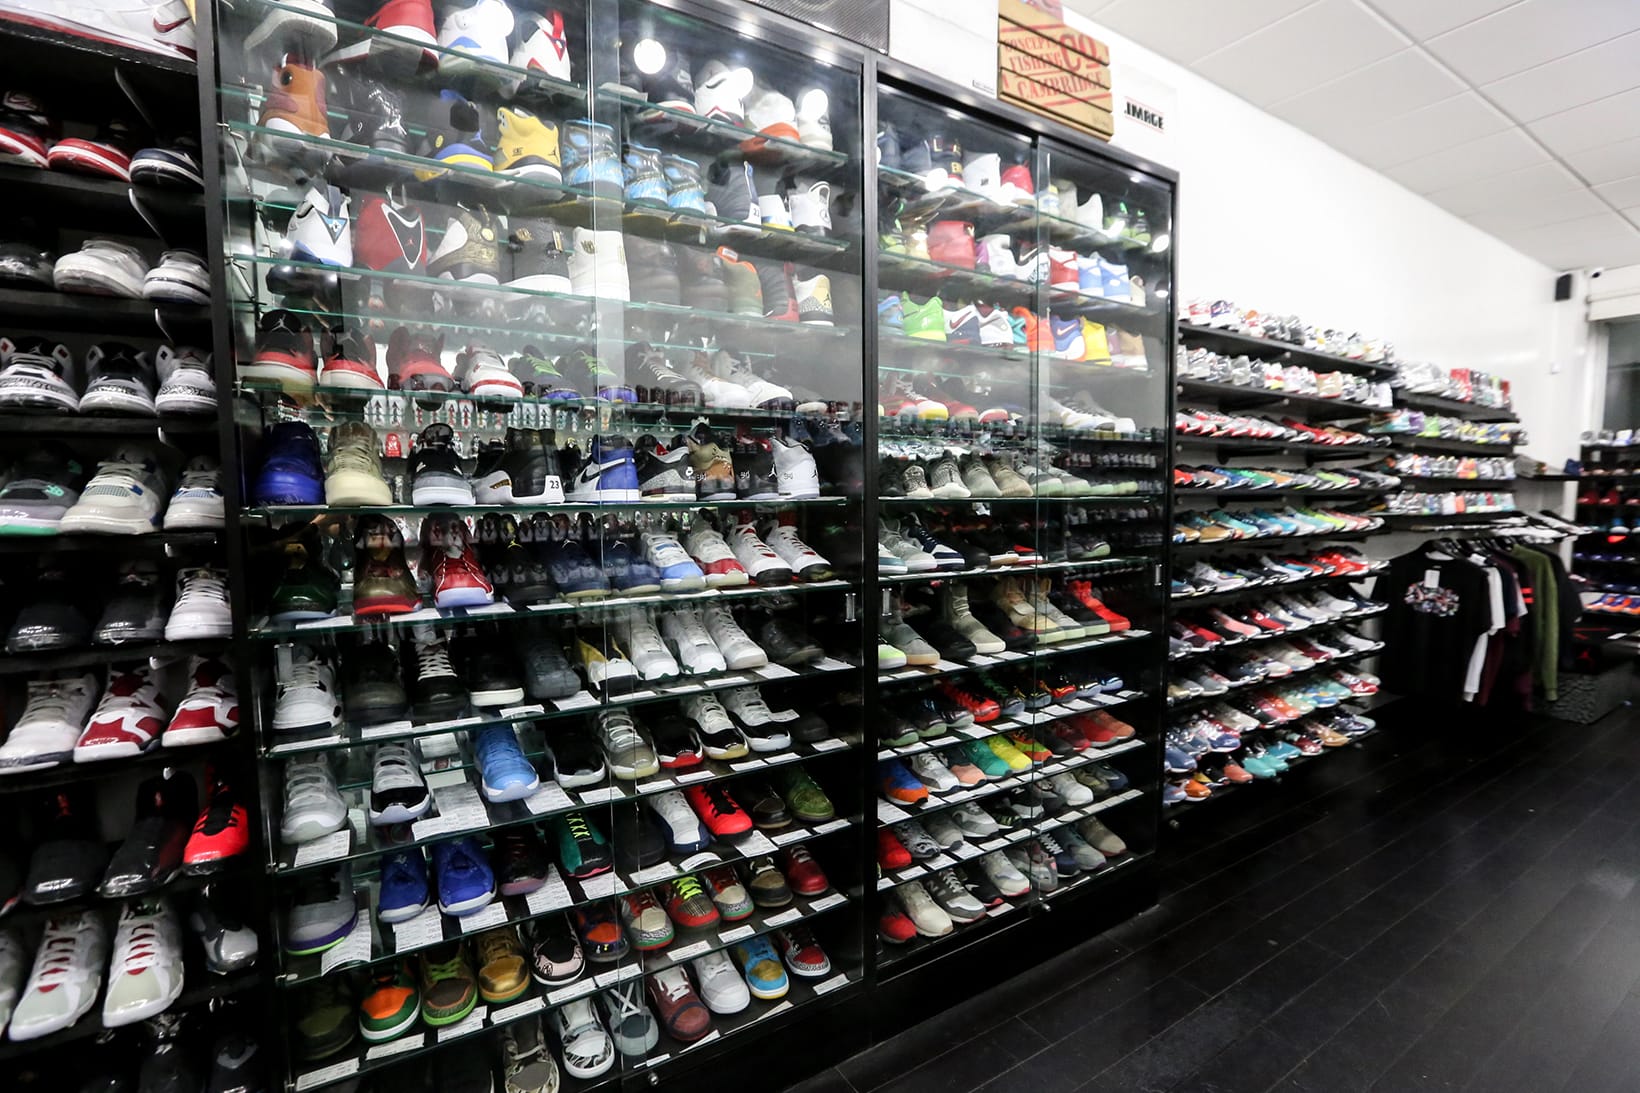 consignment store london sneakers